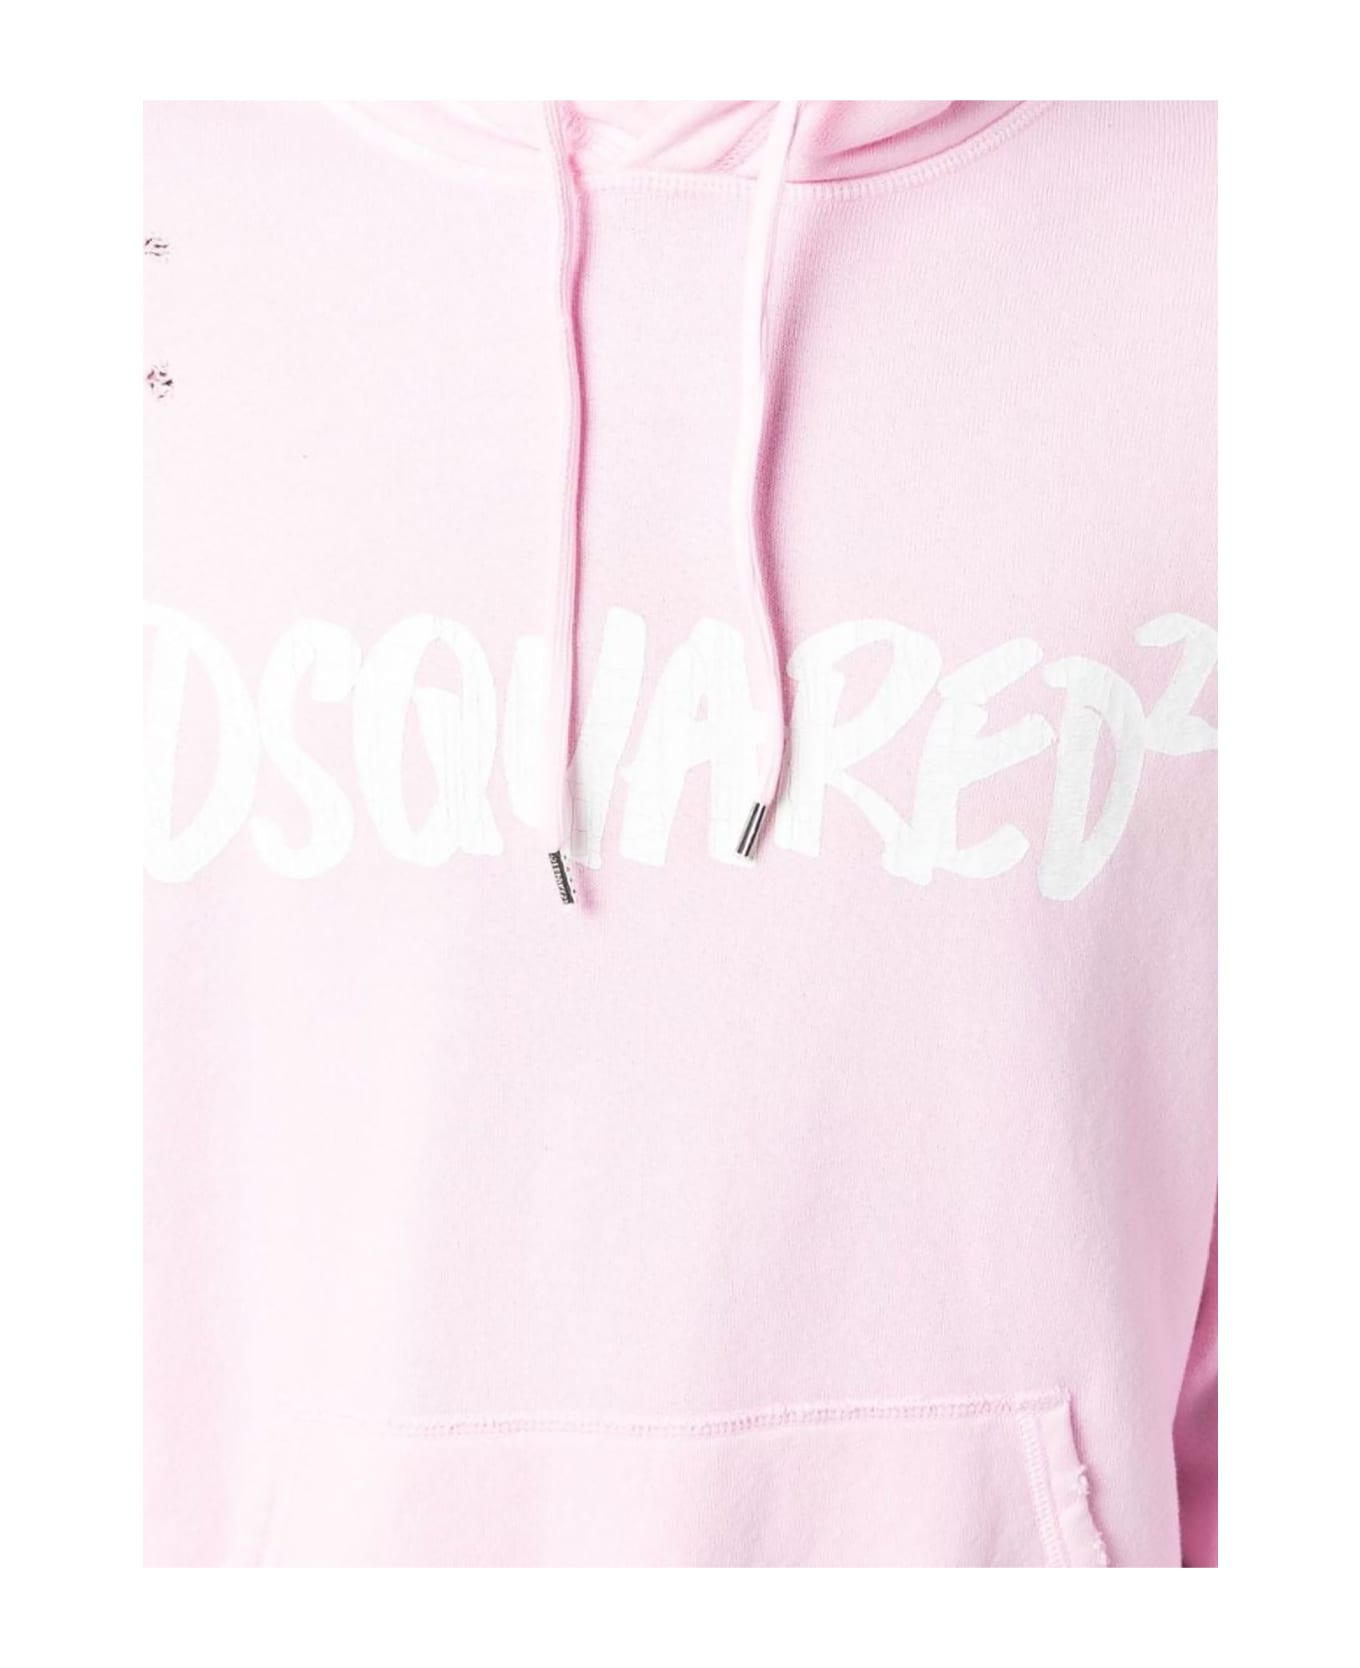 Dsquared2 Cotton Hoodie - Rosa